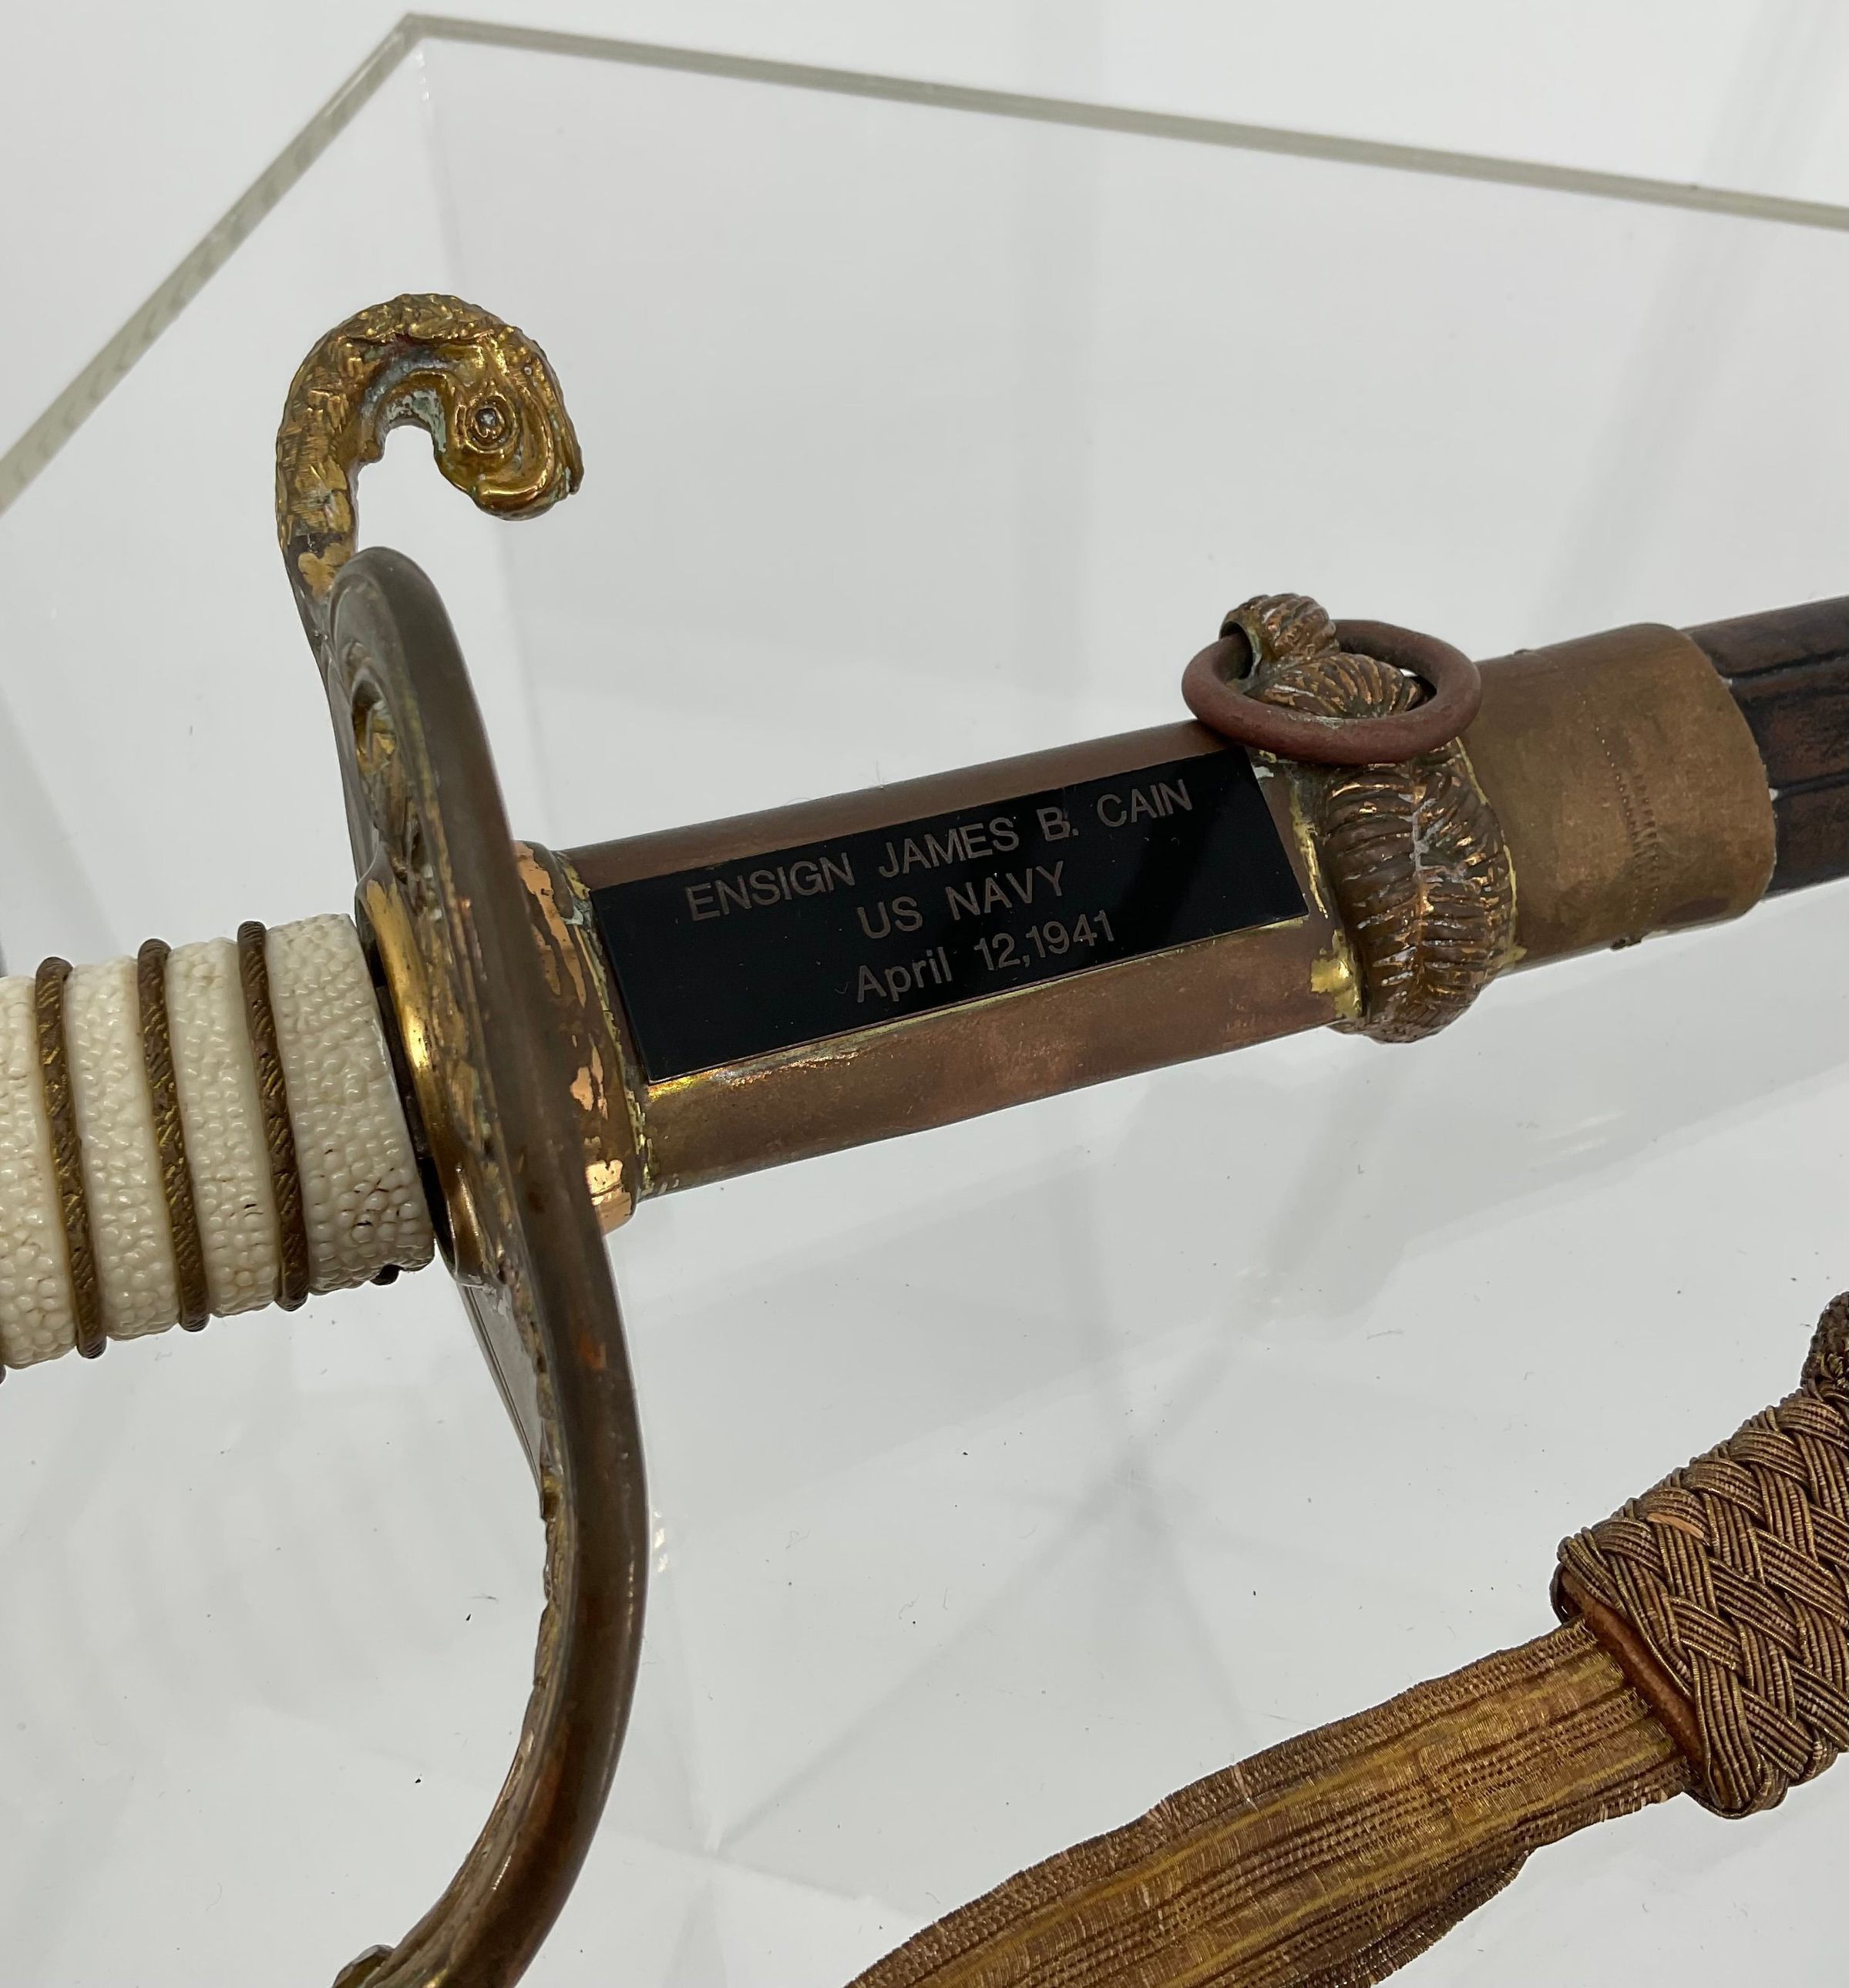 Primary Image of Naval Officer's Sword of James Cain